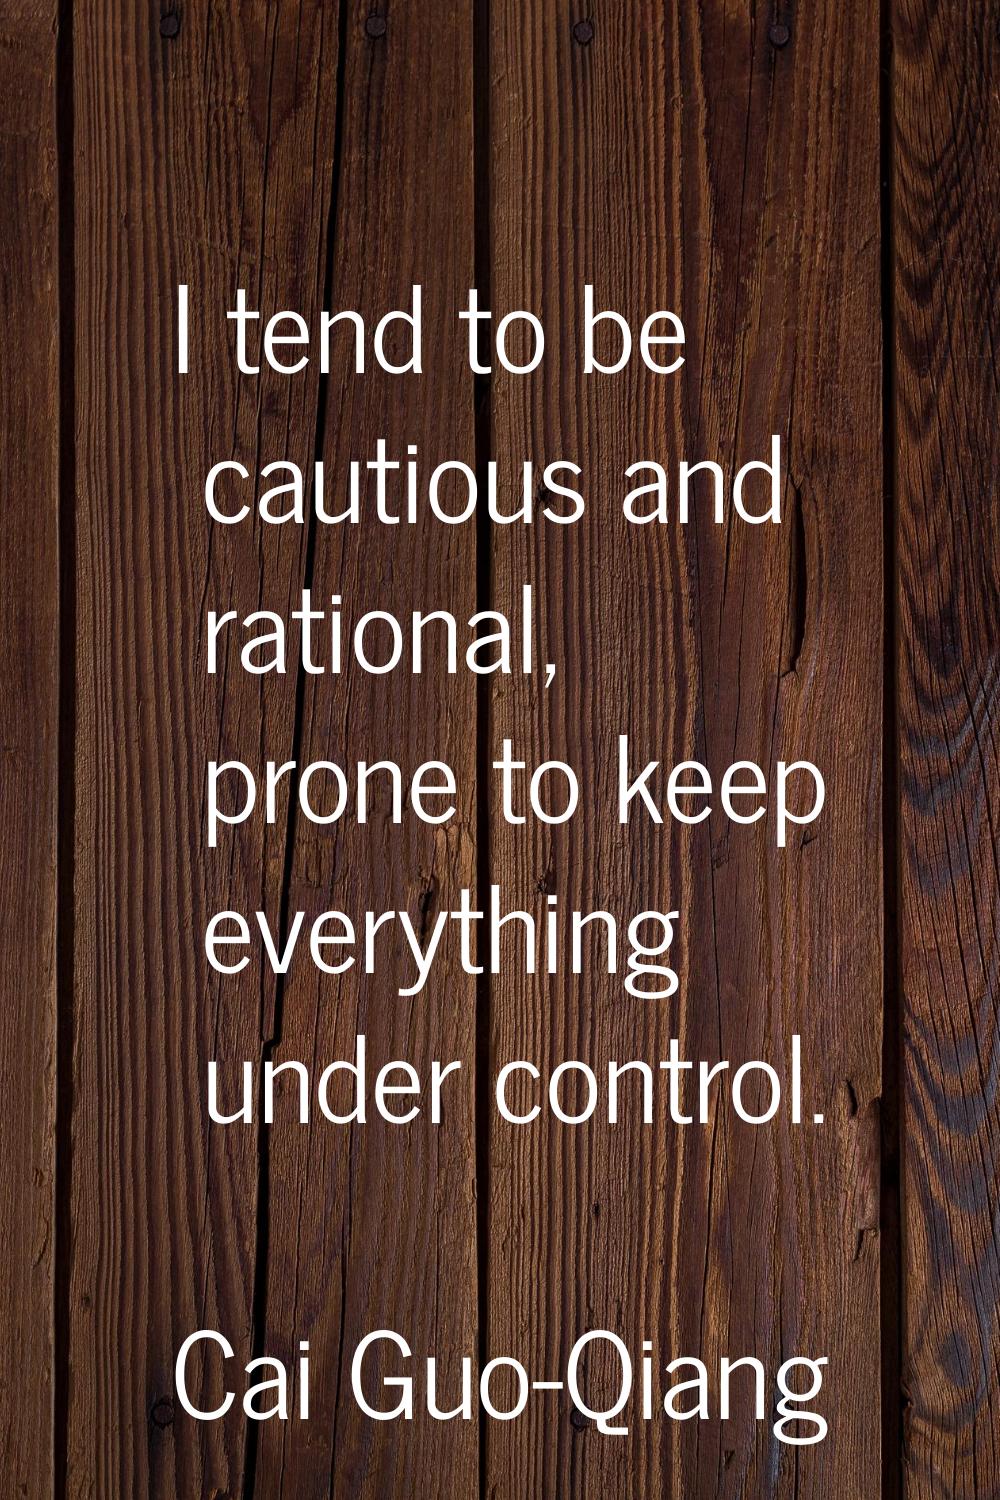 I tend to be cautious and rational, prone to keep everything under control.